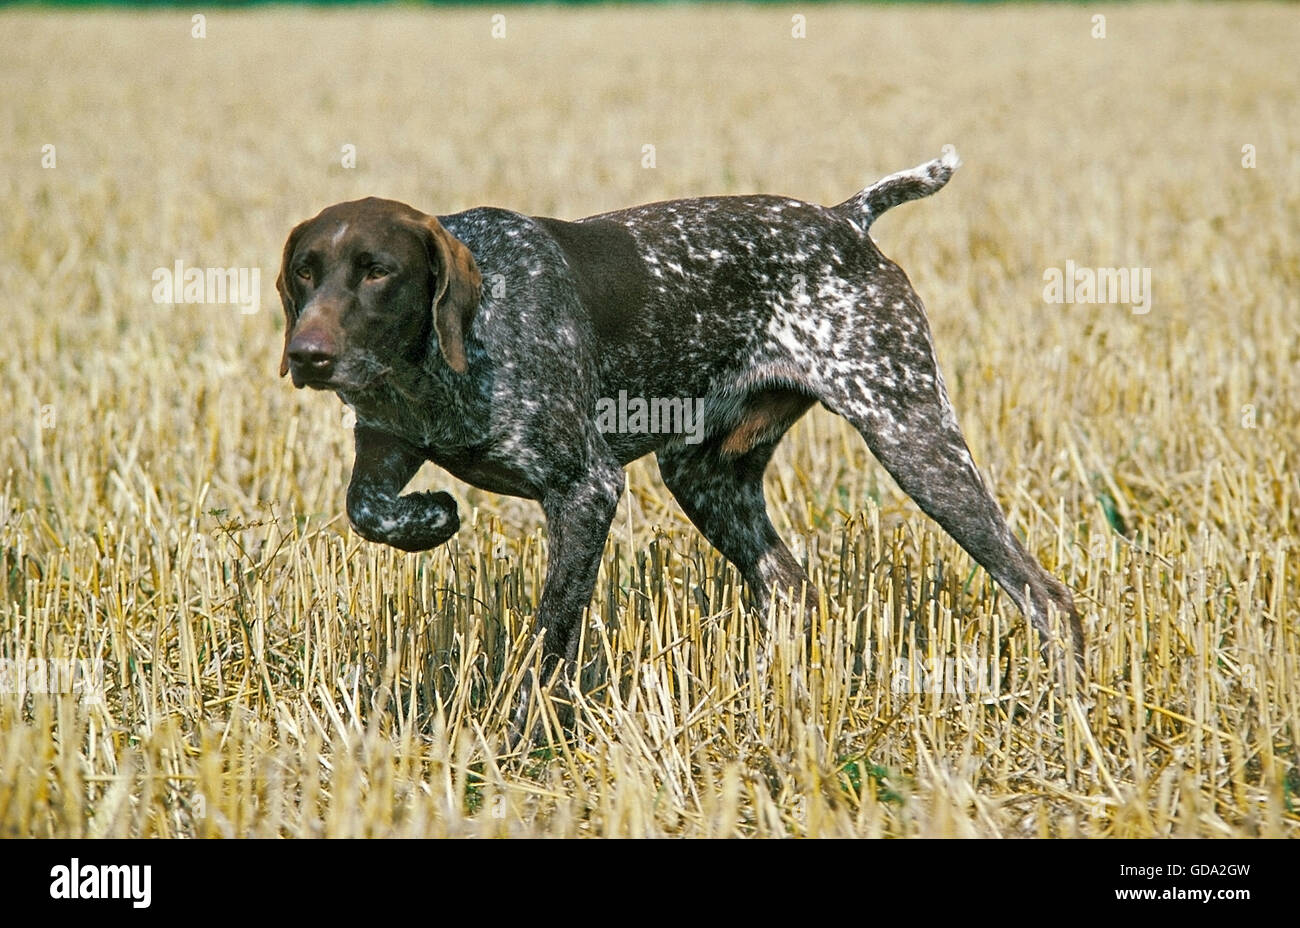 German Short-Haired Pointer Dog , Dog Pointing Stock Photo